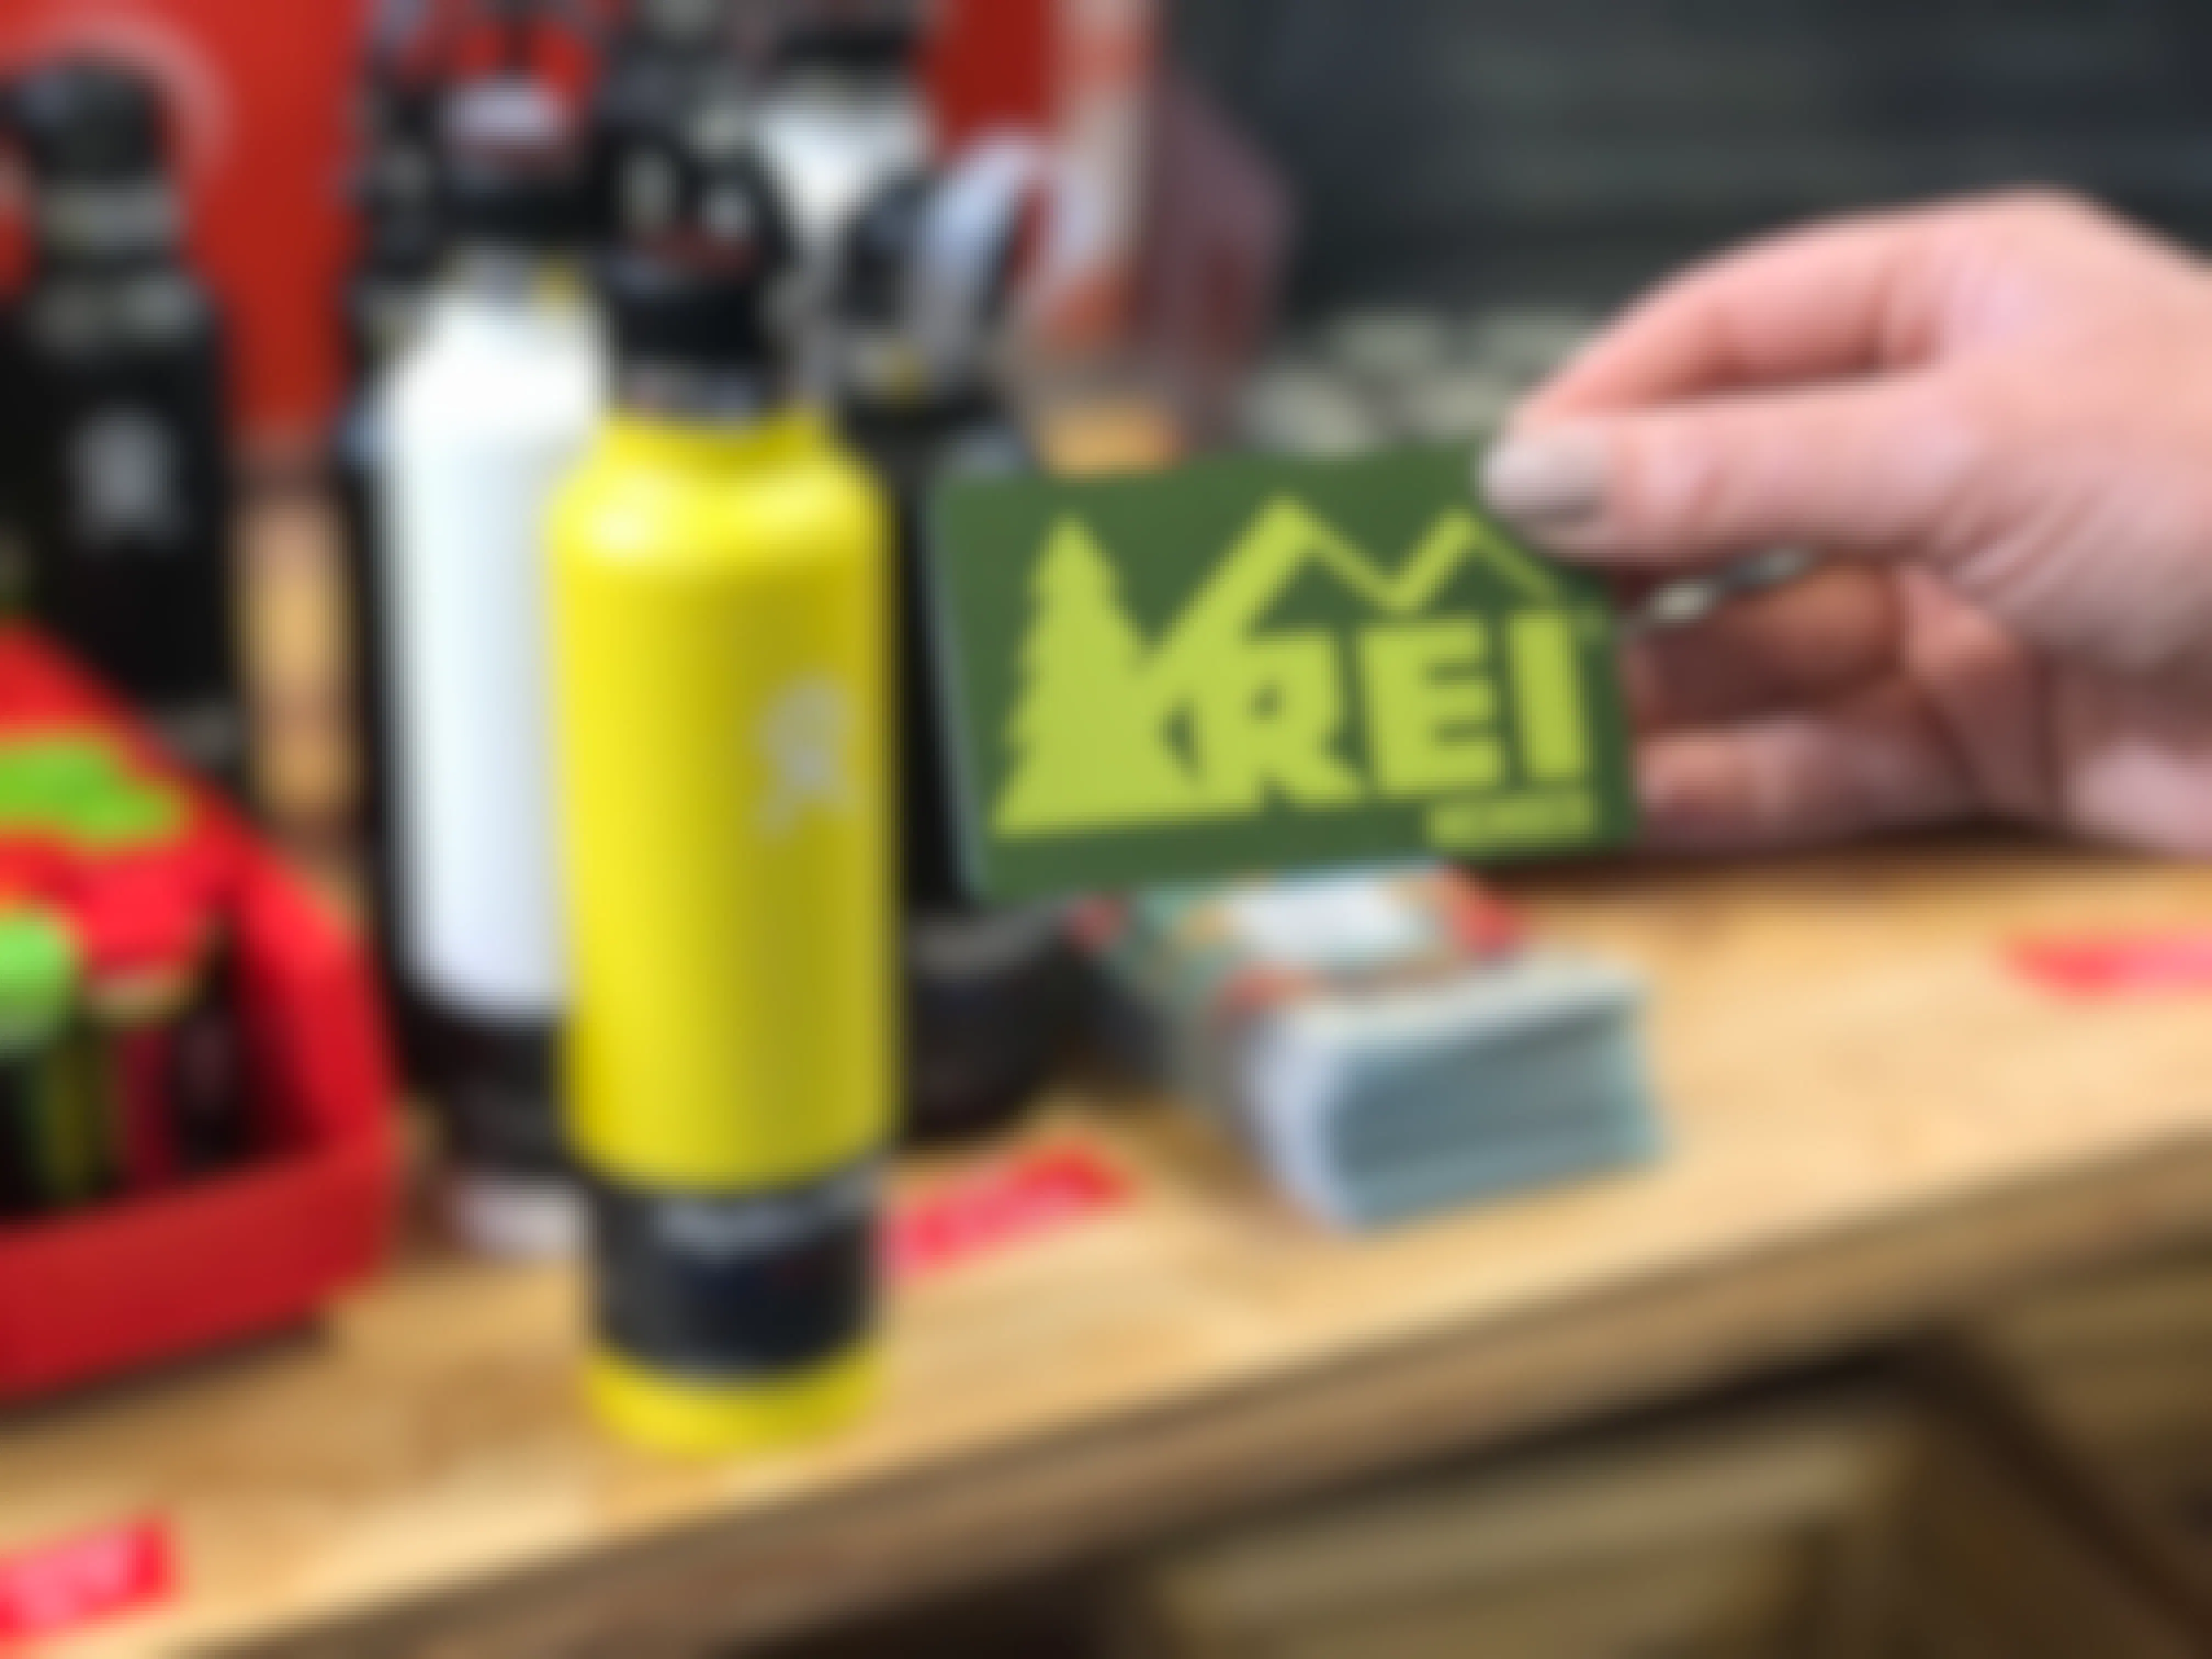 A person's hand holding a REI Member card in front of a shelf at REI.